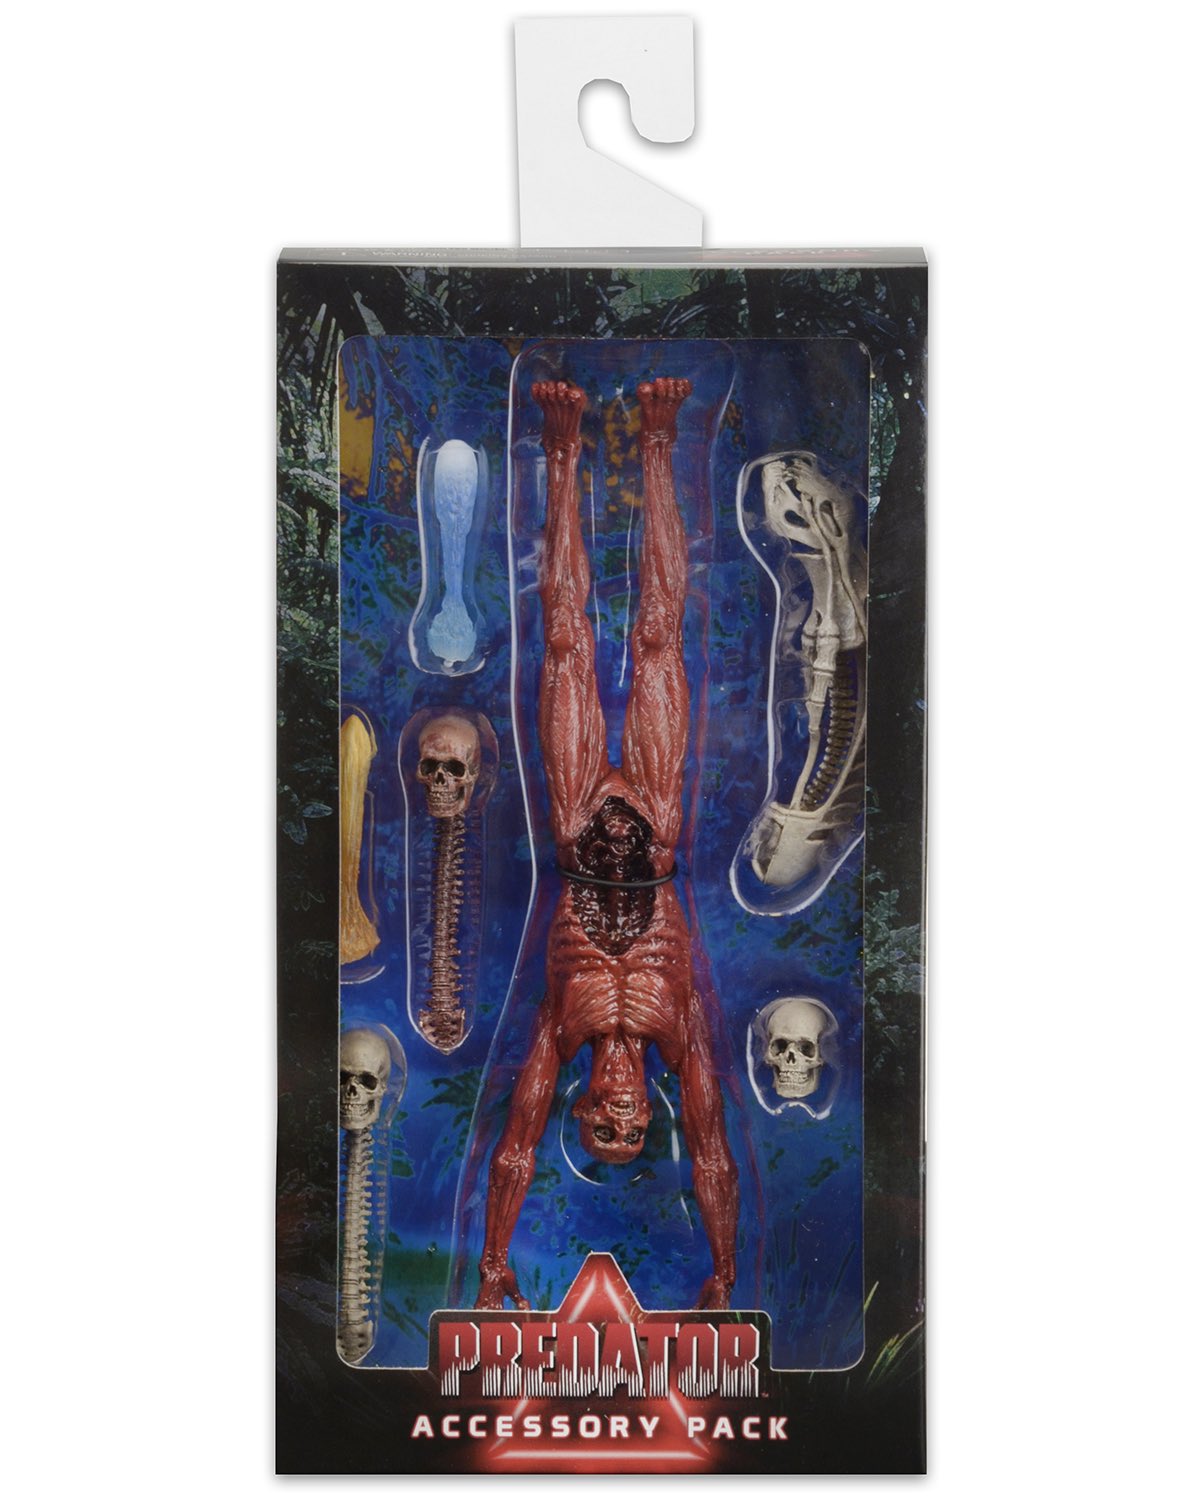 Amazingly Gross Predator Toy Accessory Pack Comes With Bloodied Bones And A Skinned Human